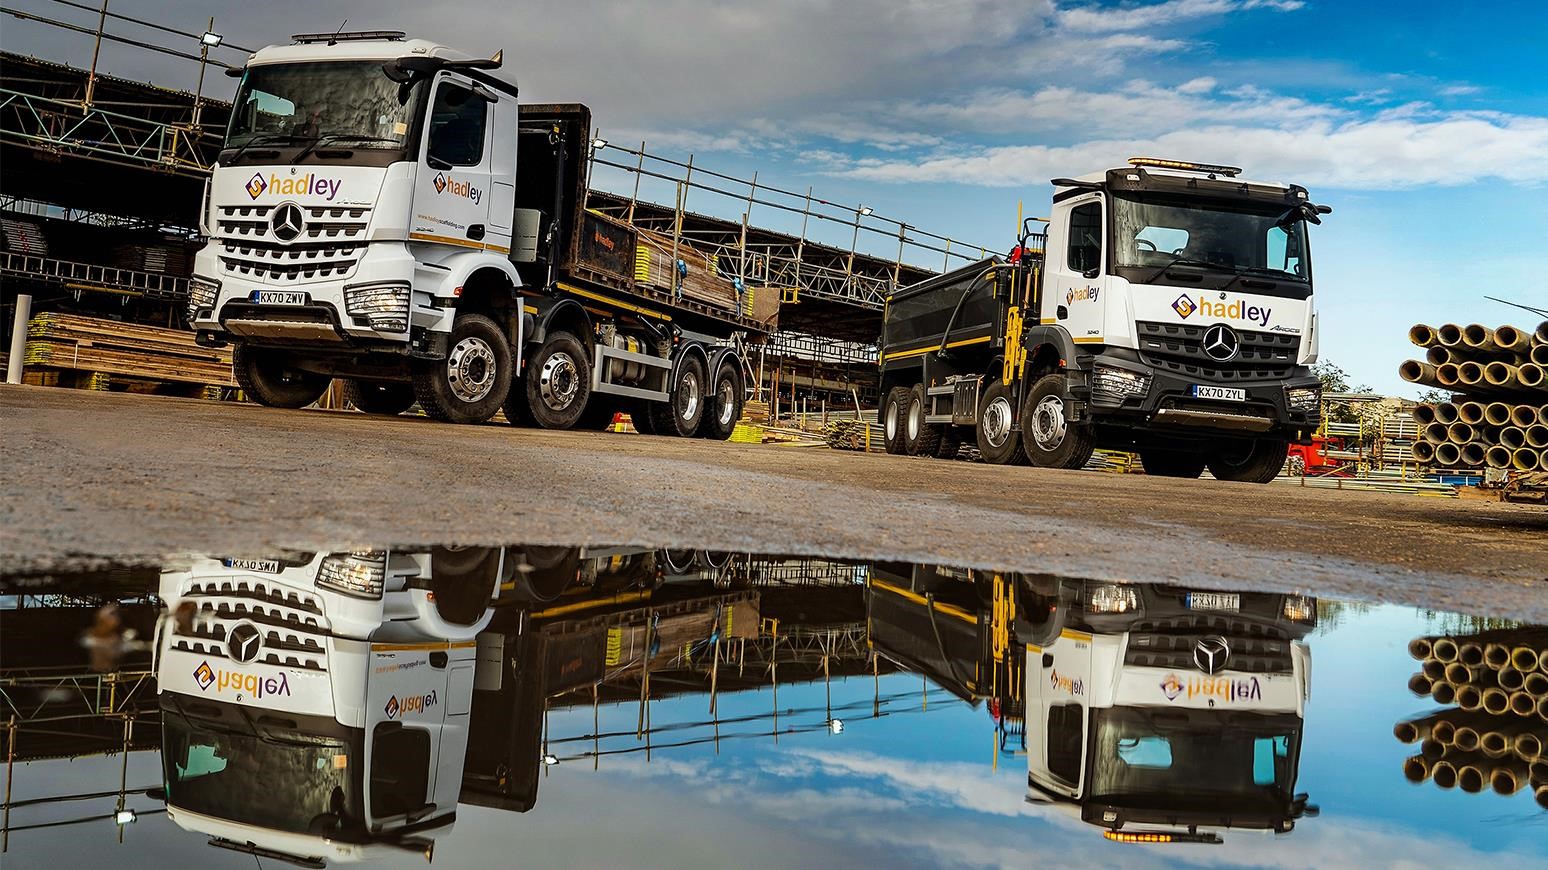 Rochester-Based Scaffolding & Waste Management Firm Adds Two New Arocs 3240 Trucks To Fleet